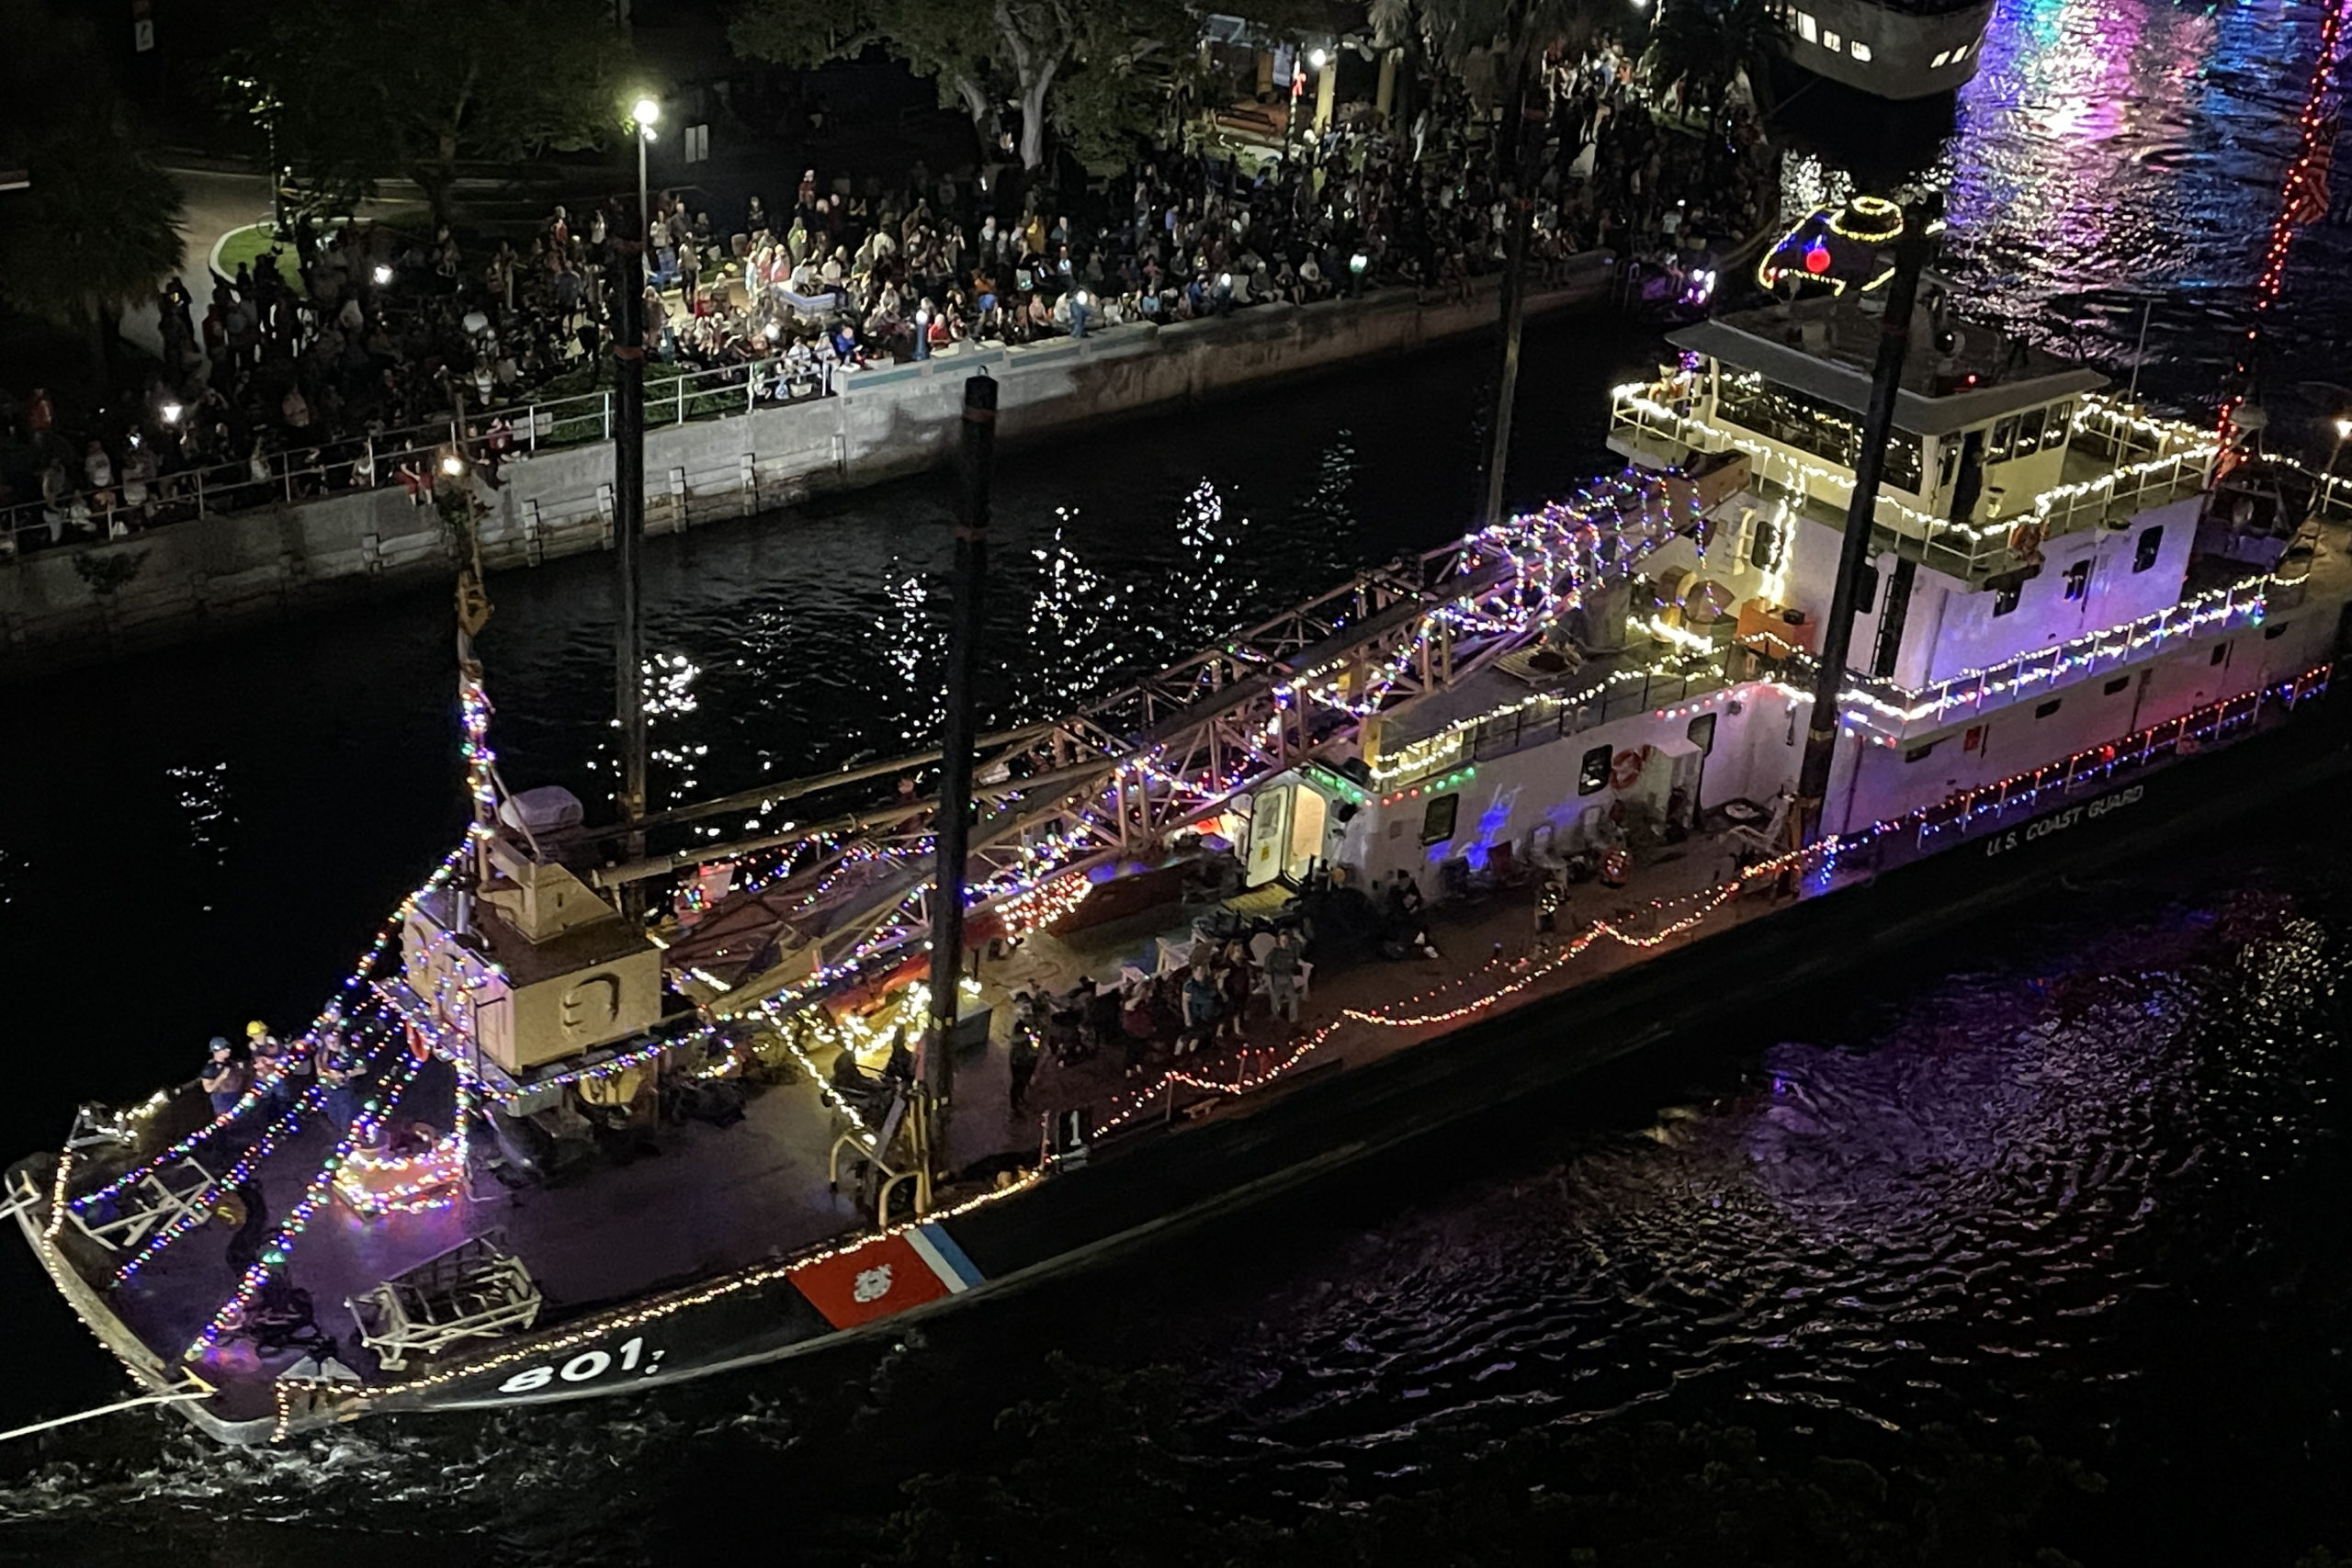 U.S. Coast Guard Hudson, boat number 1 in the 2022 Winterfest Boat Parade